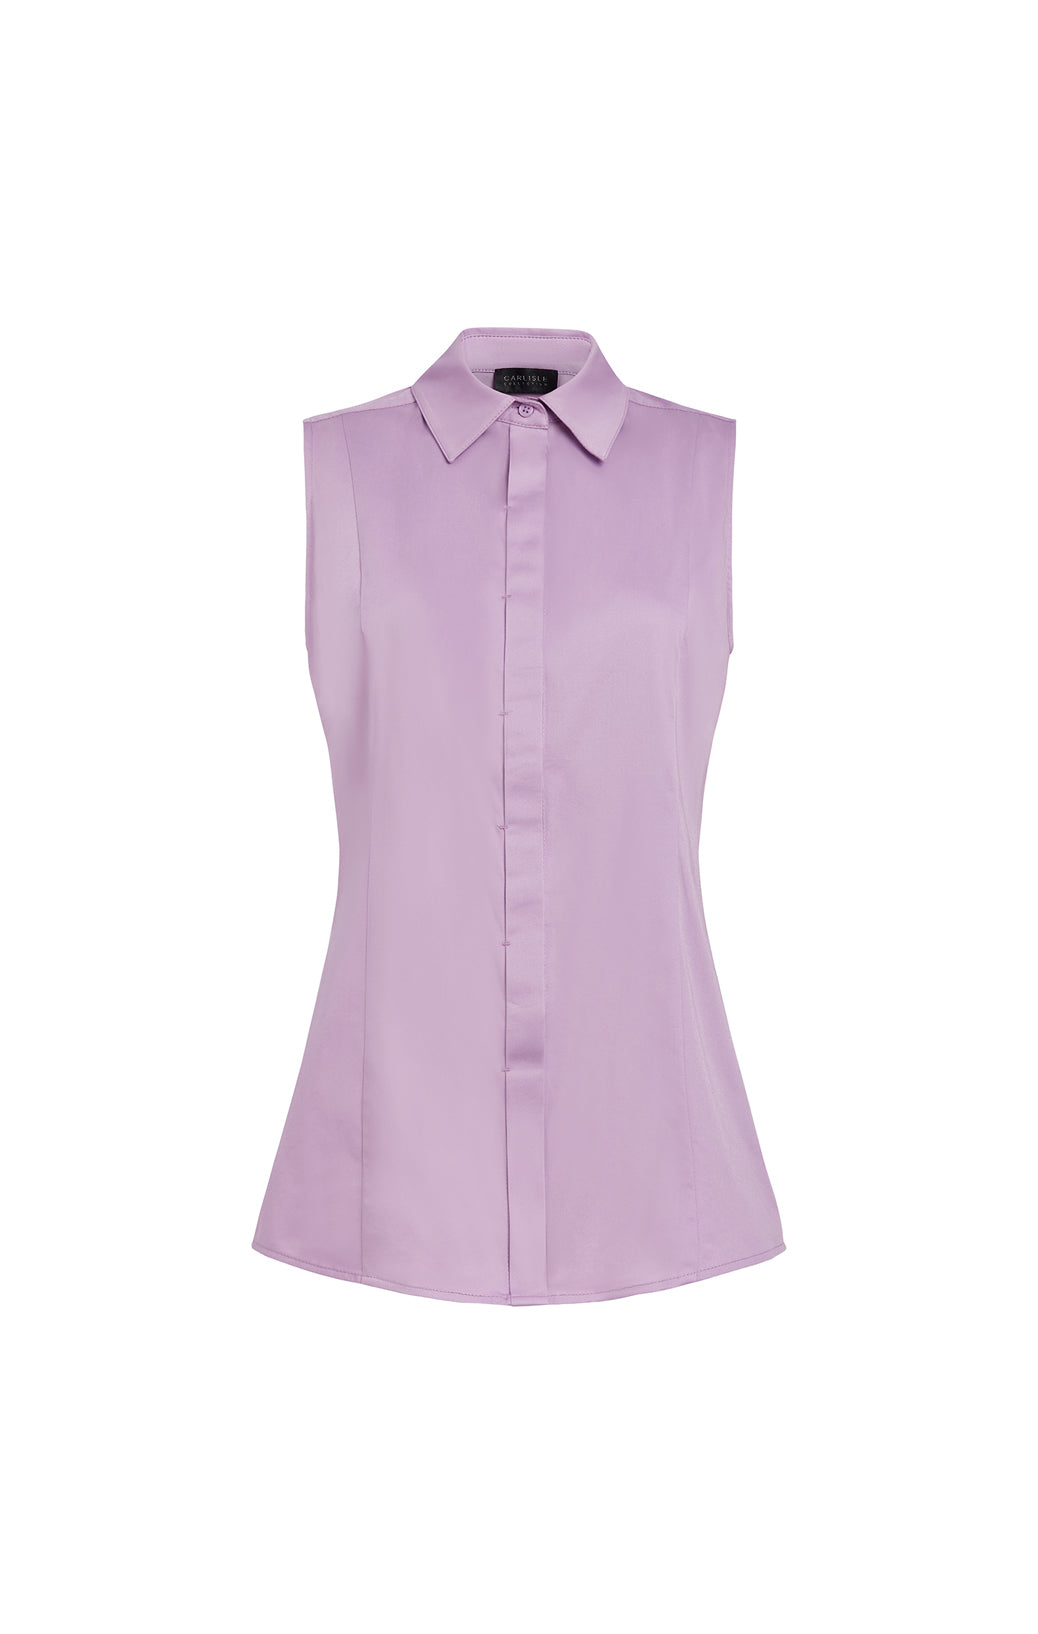 Parade - Colorful Placed Pinstripe Blouse - Product Image